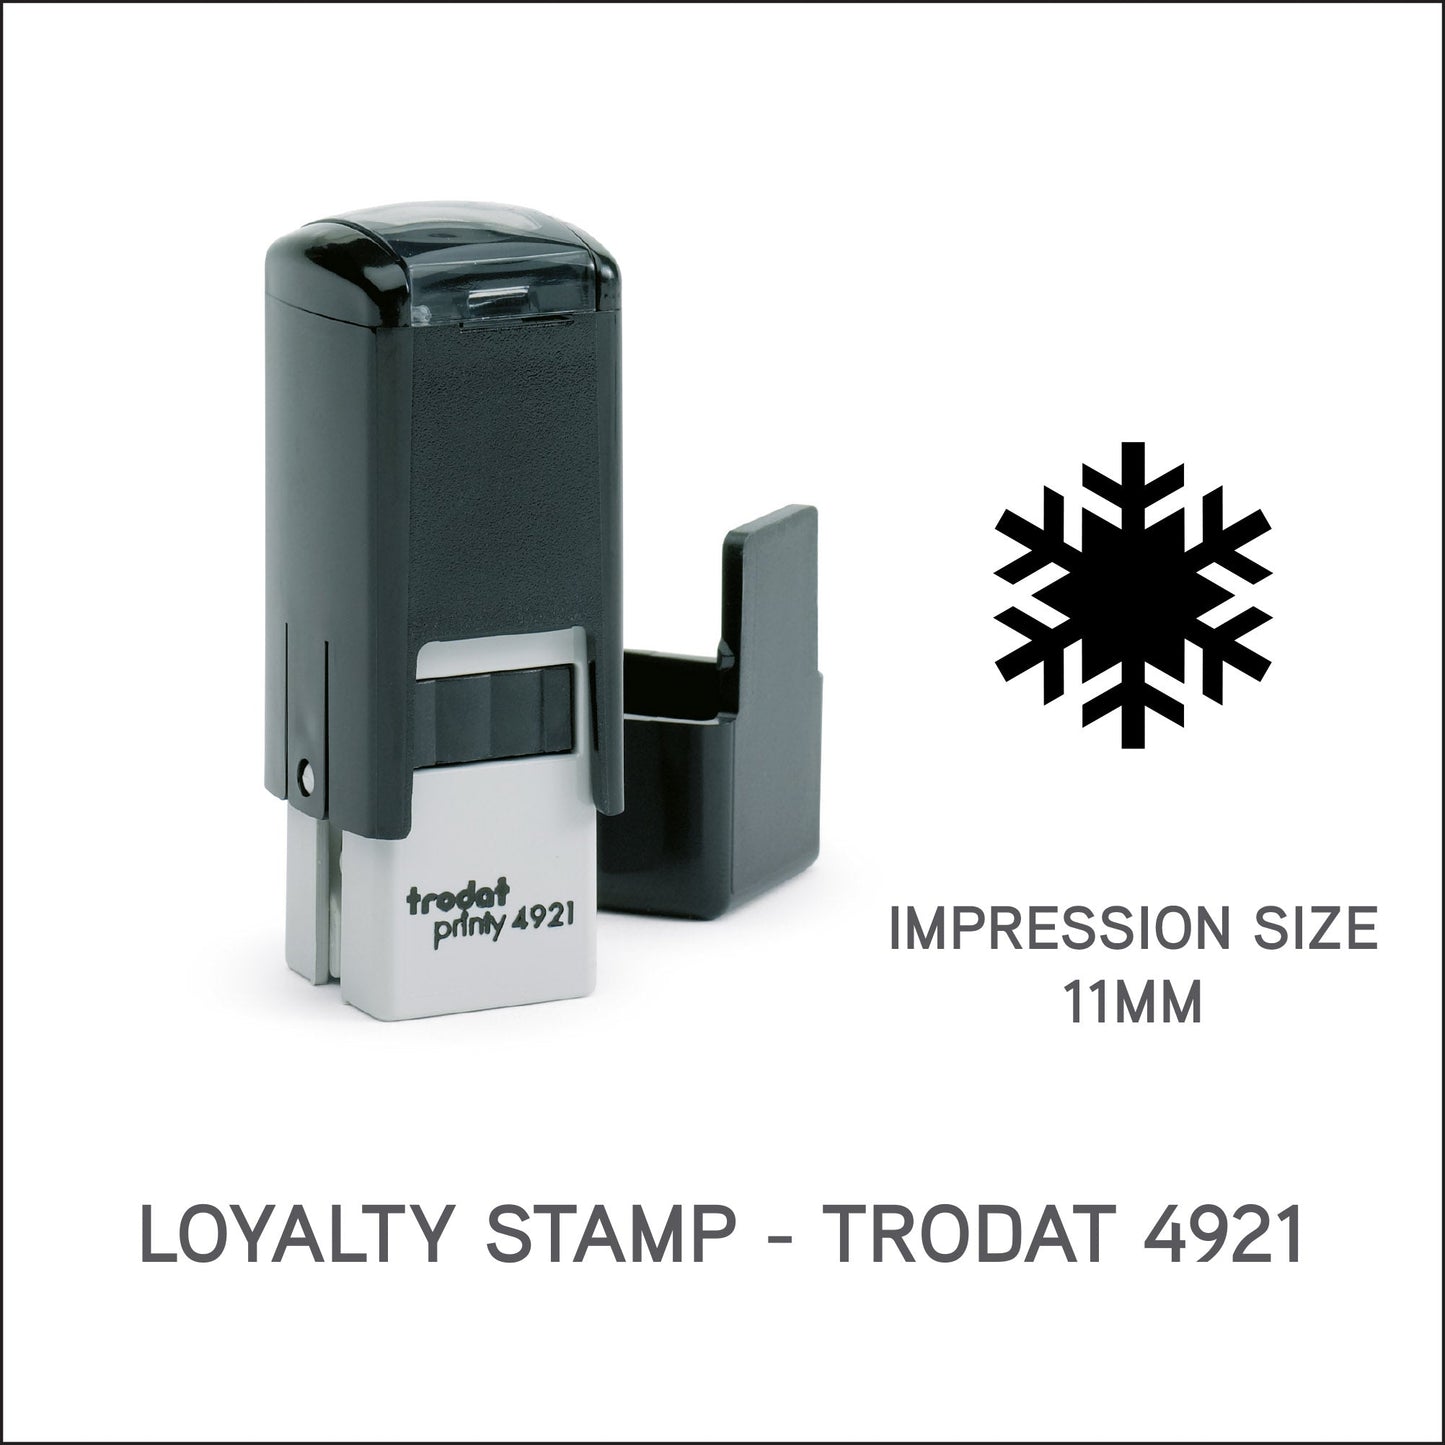 Snowflake - Christmas - Loyalty Card Rubber Stamp - Trodat 4921 - 11mm x 11mm Impression